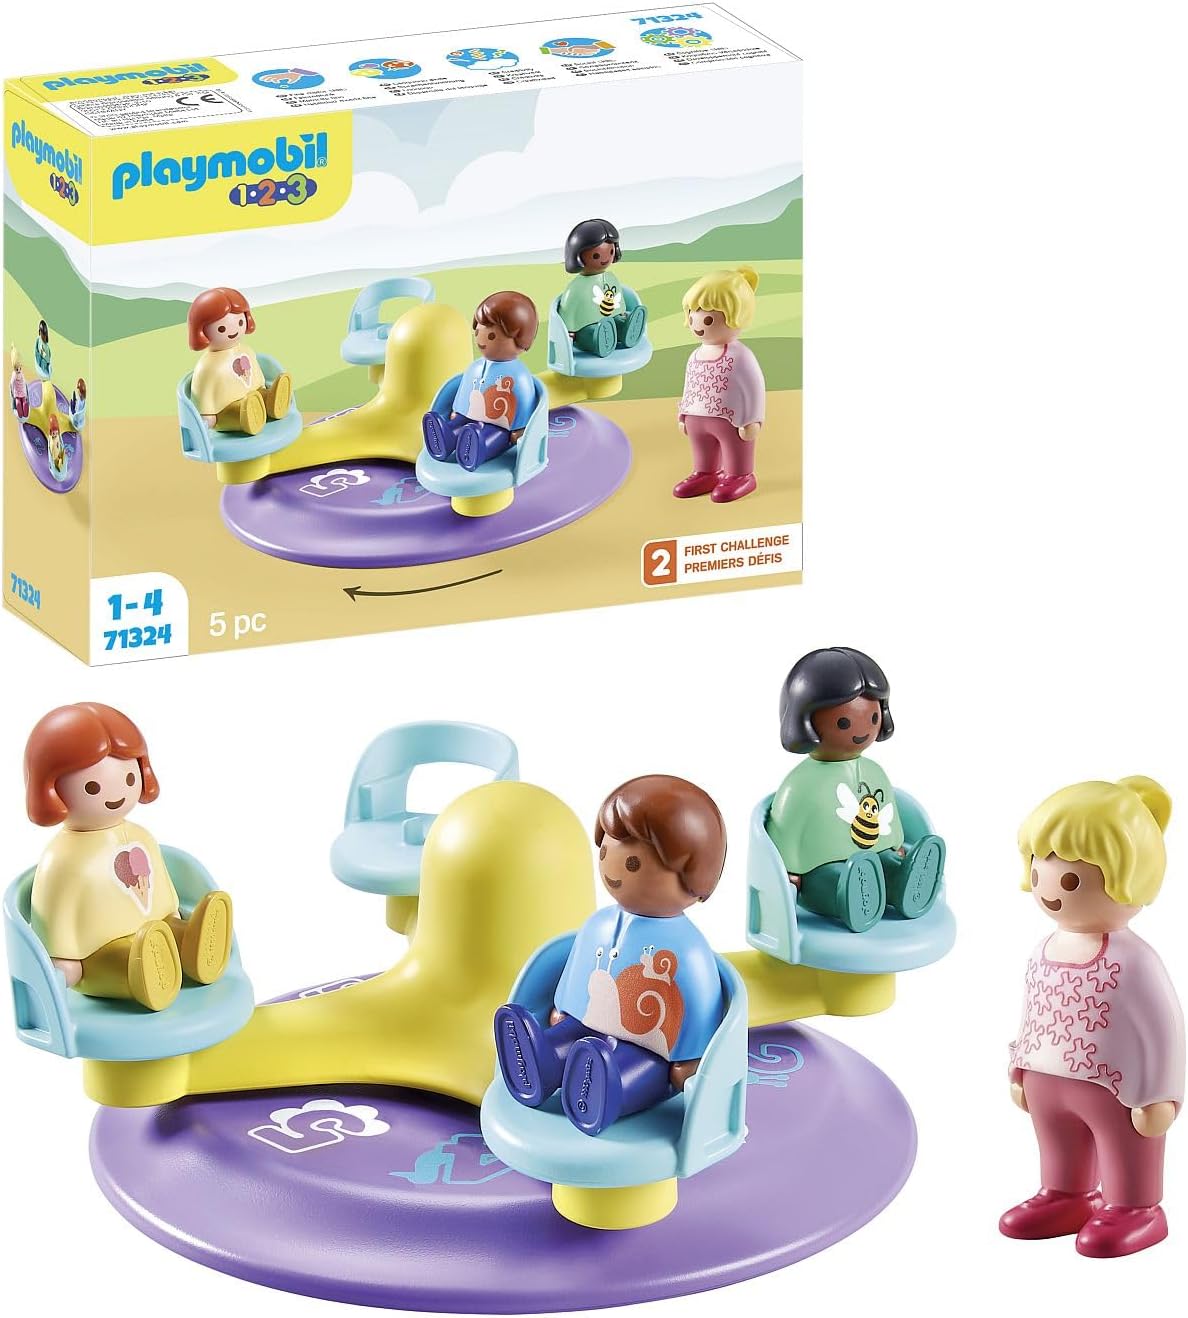 PLAYMOBIL 1.2.3: 71324 Number Carousel, Educational Toy and First Counting for Toddlers, Toys for Children from 12 Months